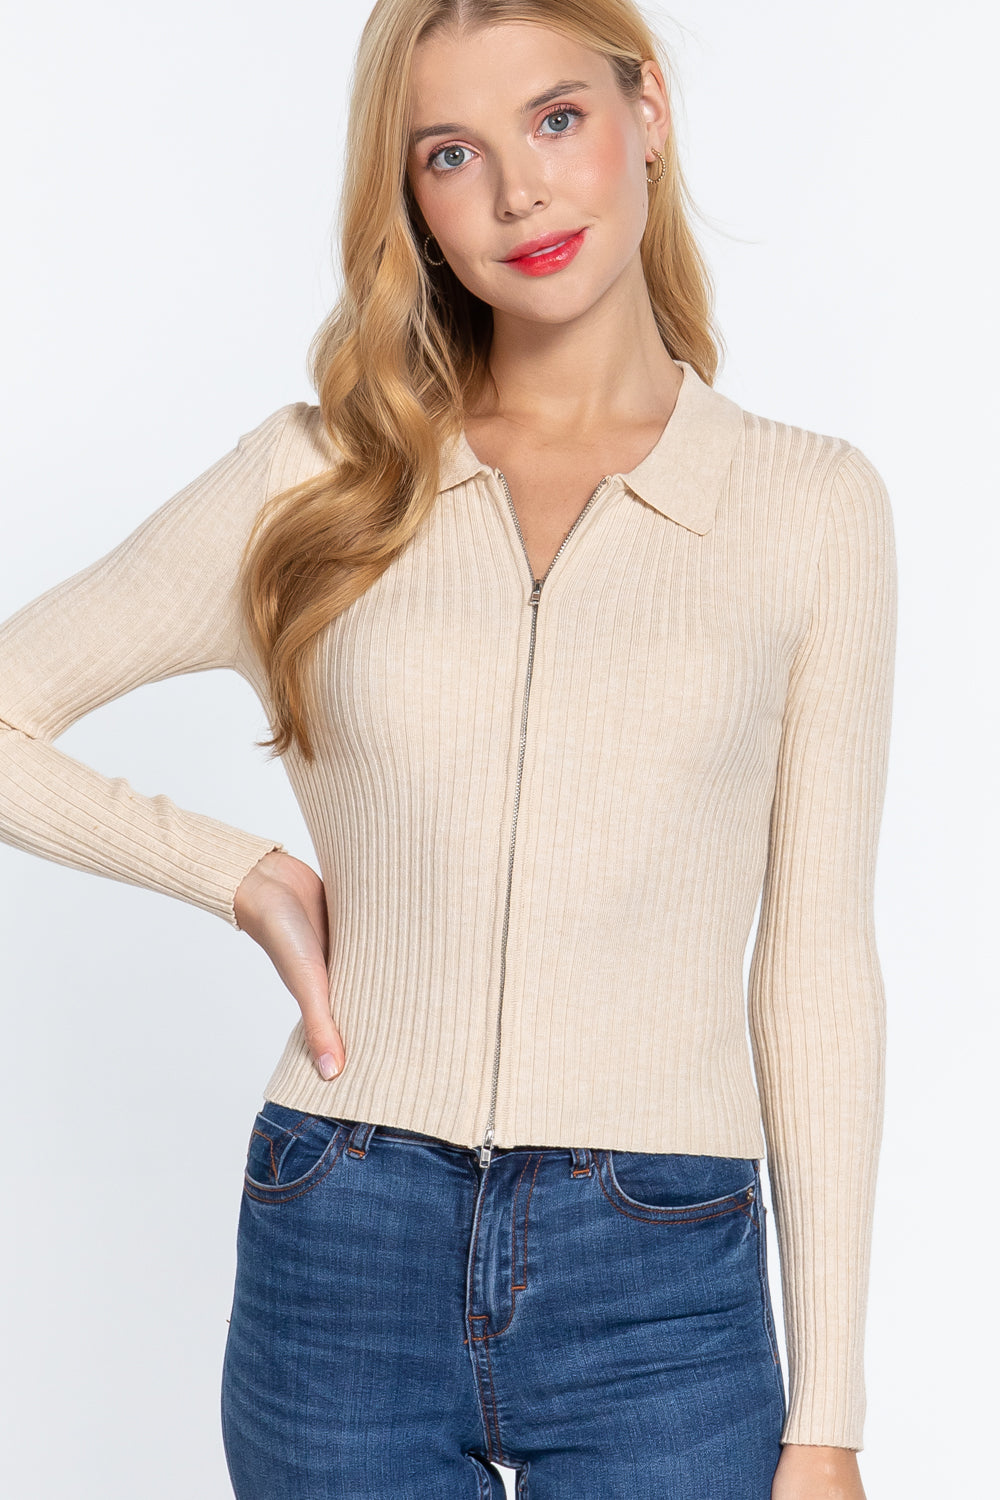 Notched Collar Zippered Sweater Sunny EvE Fashion